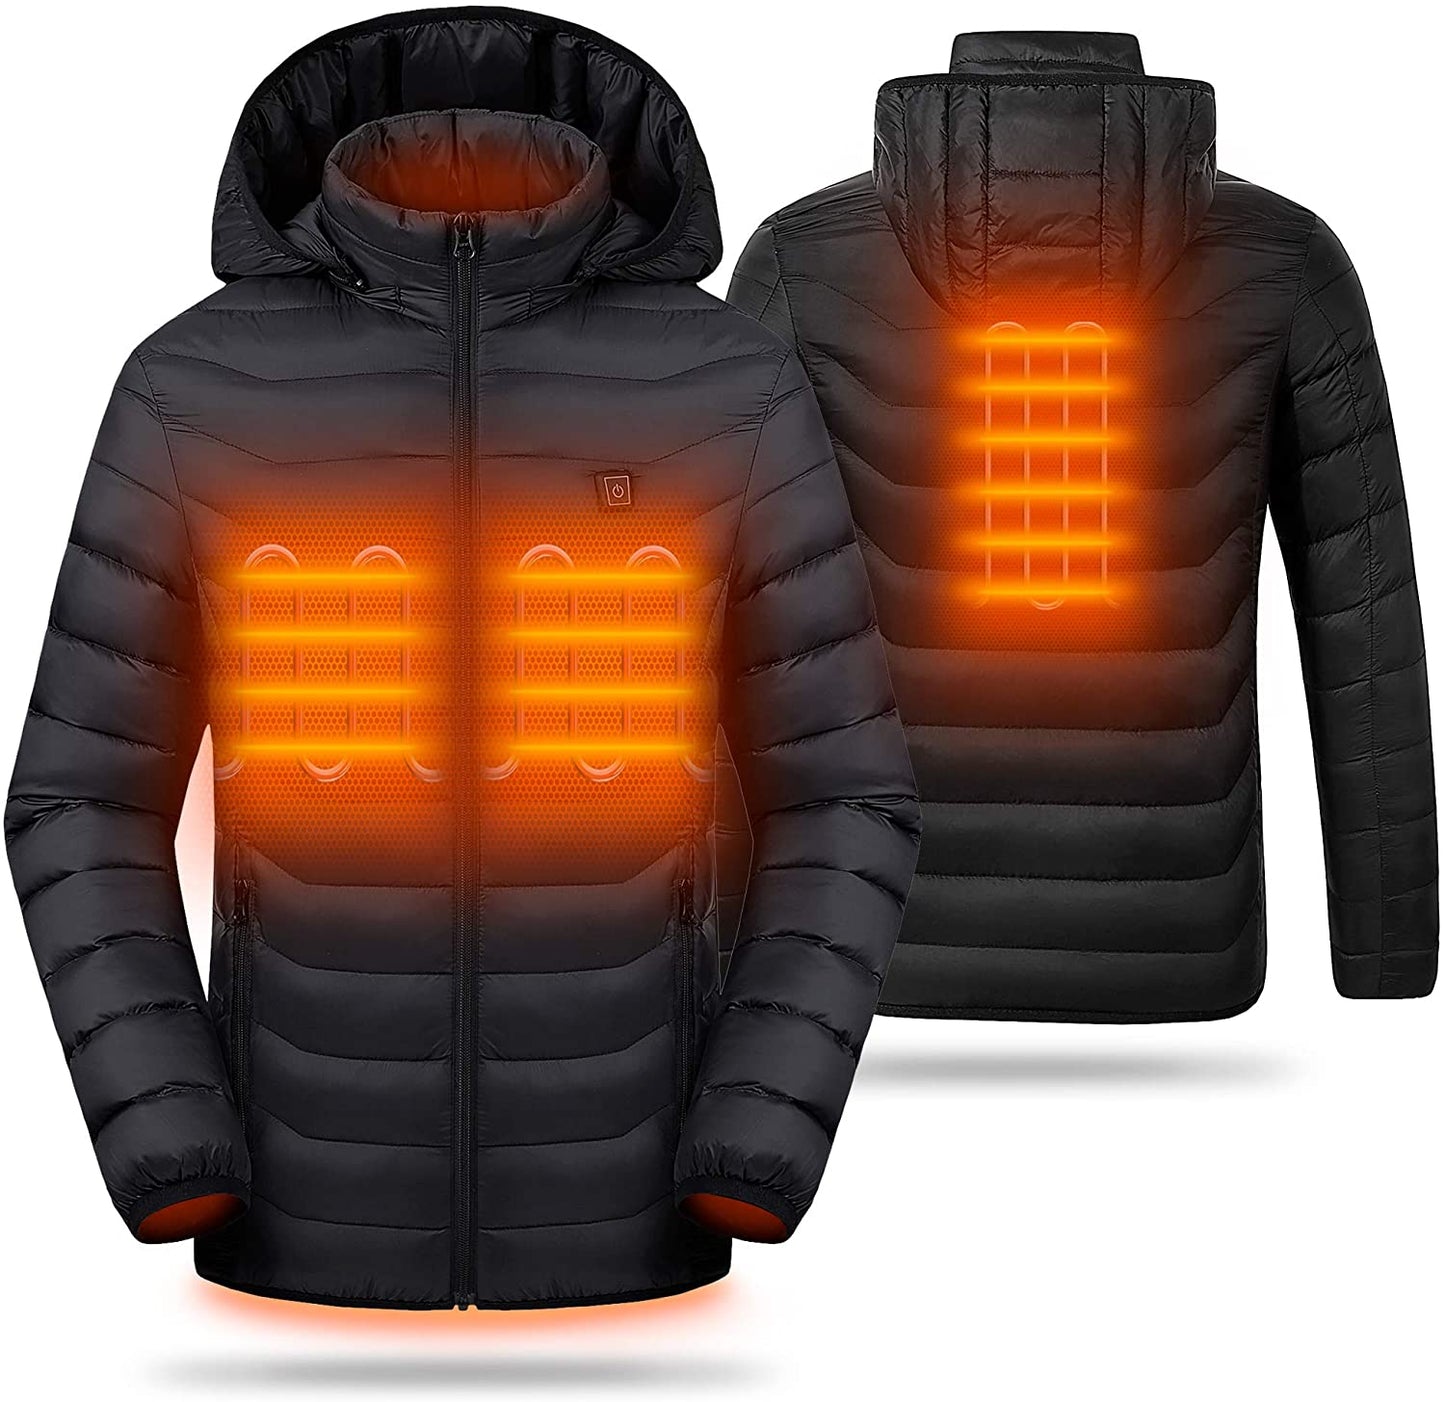 Includes Battery Unisex Warm Heated Jacket - Heated Coat Hooded for Men Women Outdoor Sports - Home Decor Gifts and More